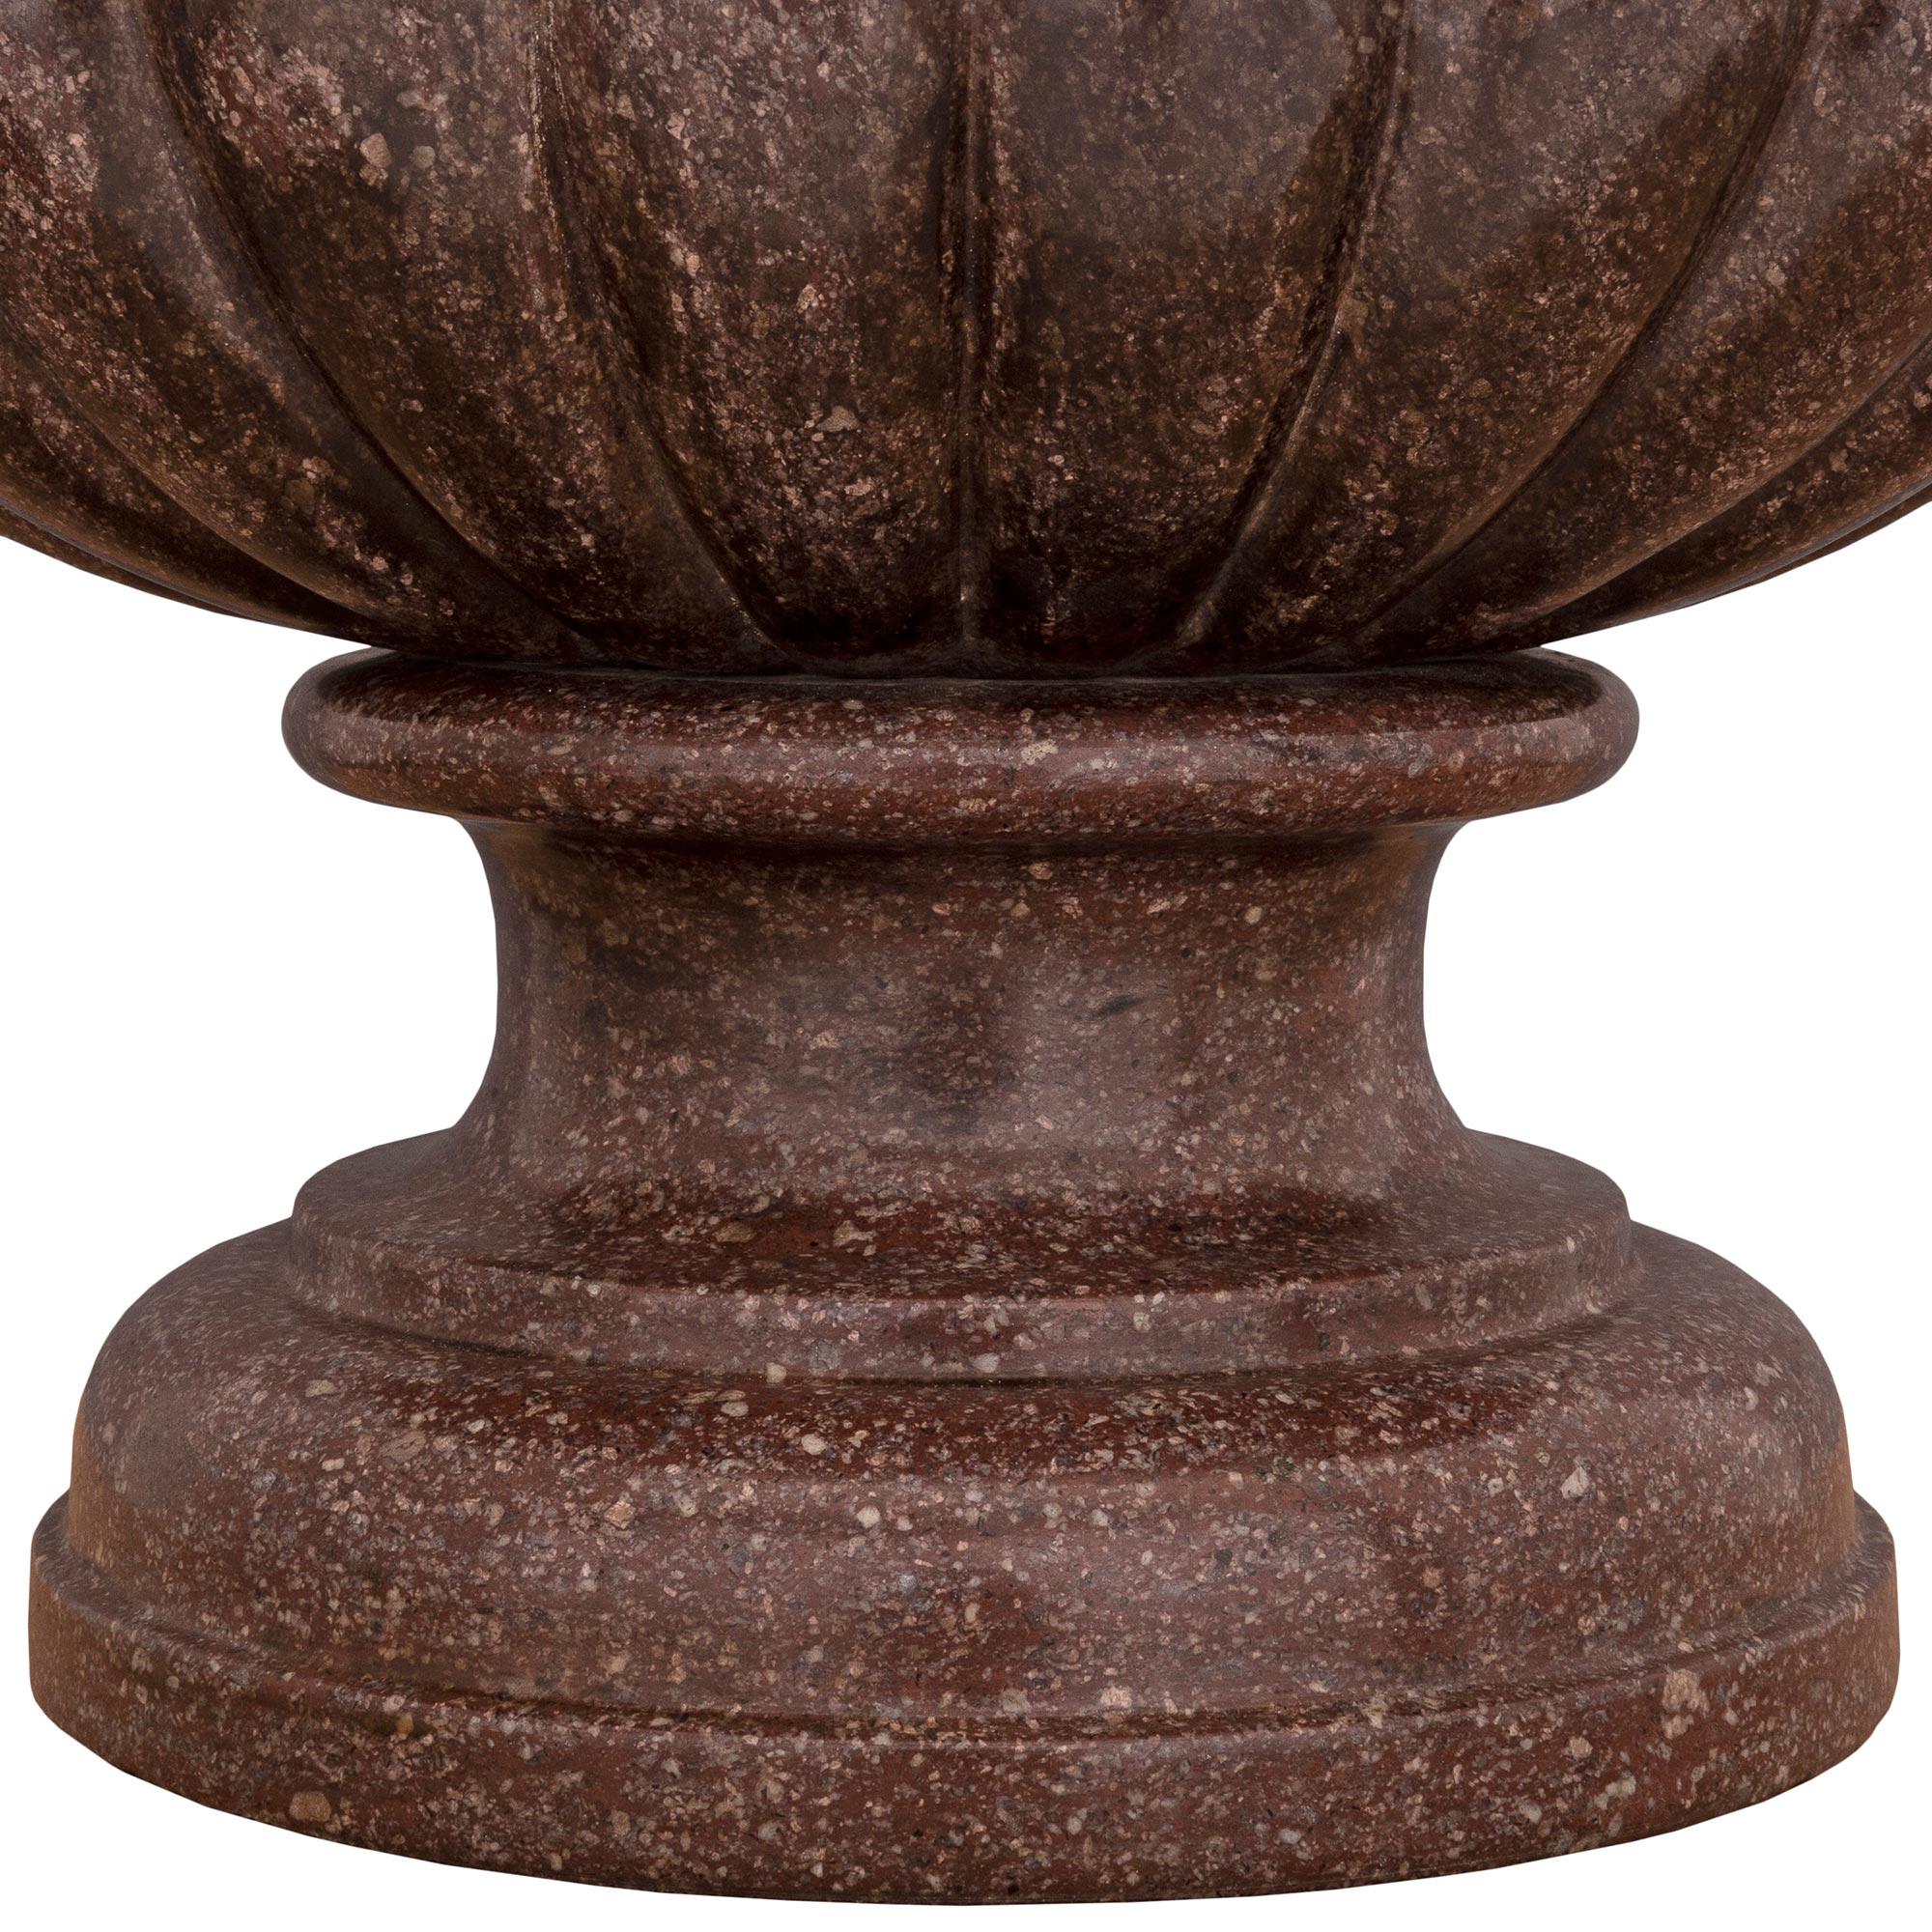 Italian Early 19th Century Solid Porphyry and Ormolu Urn, circa 1810 For Sale 5